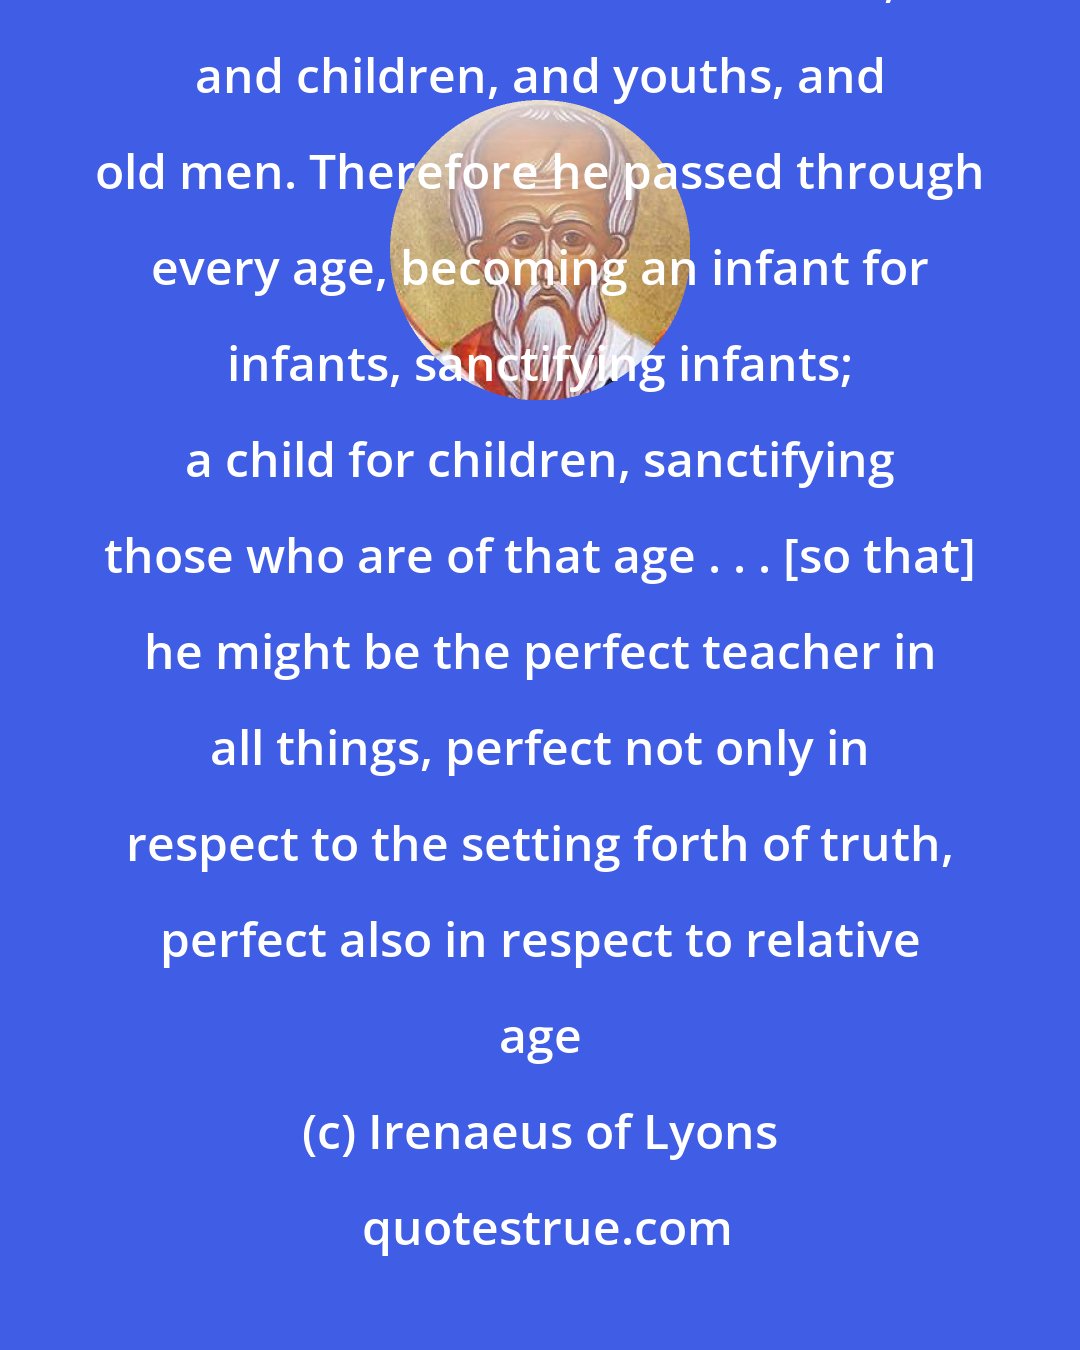 Irenaeus of Lyons: He [Jesus] came to save all through himself; all, I say, who through him are reborn in God: infants, and children, and youths, and old men. Therefore he passed through every age, becoming an infant for infants, sanctifying infants; a child for children, sanctifying those who are of that age . . . [so that] he might be the perfect teacher in all things, perfect not only in respect to the setting forth of truth, perfect also in respect to relative age